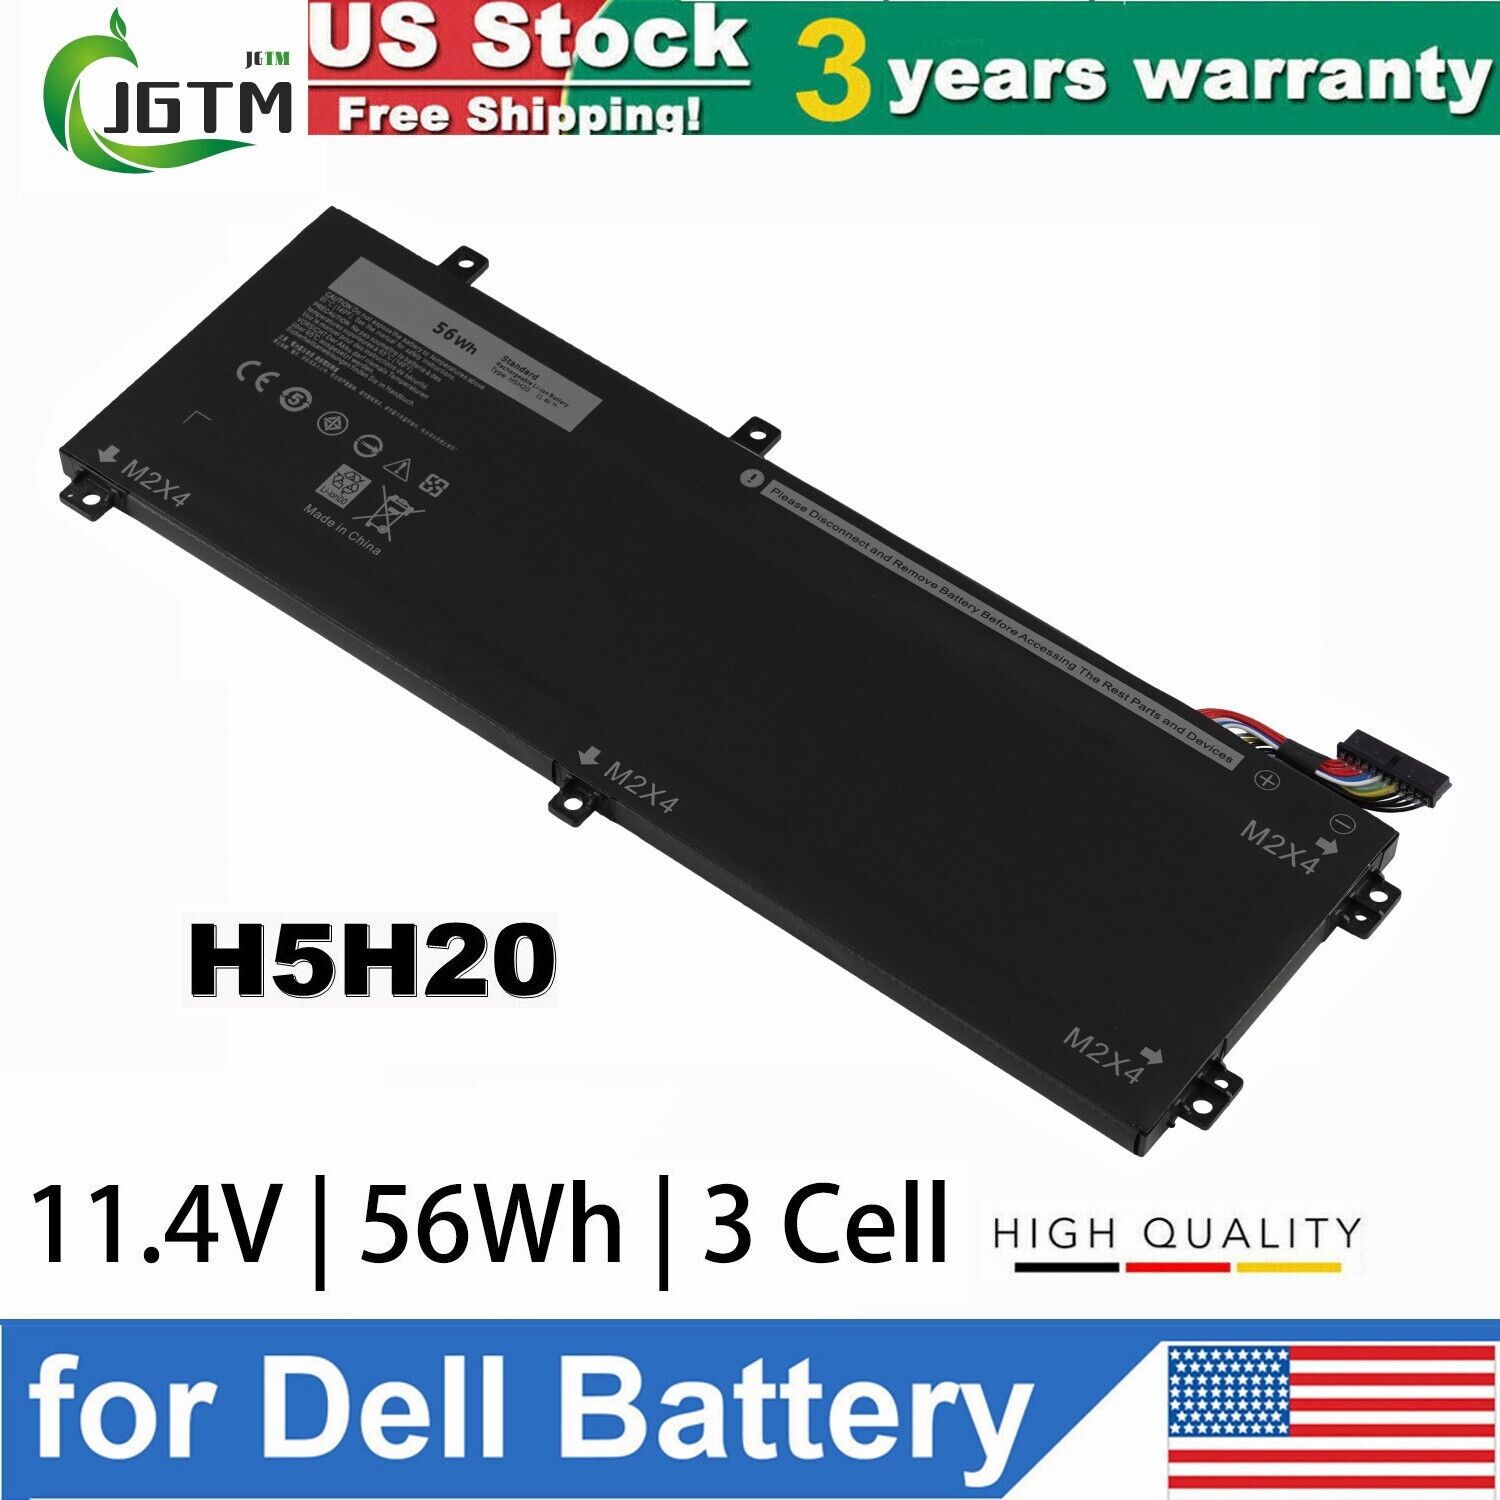 H5H20 Battery For Dell Precision 5510 5520 5530 5540 XPS 15 9560 9550 9570 56Wh